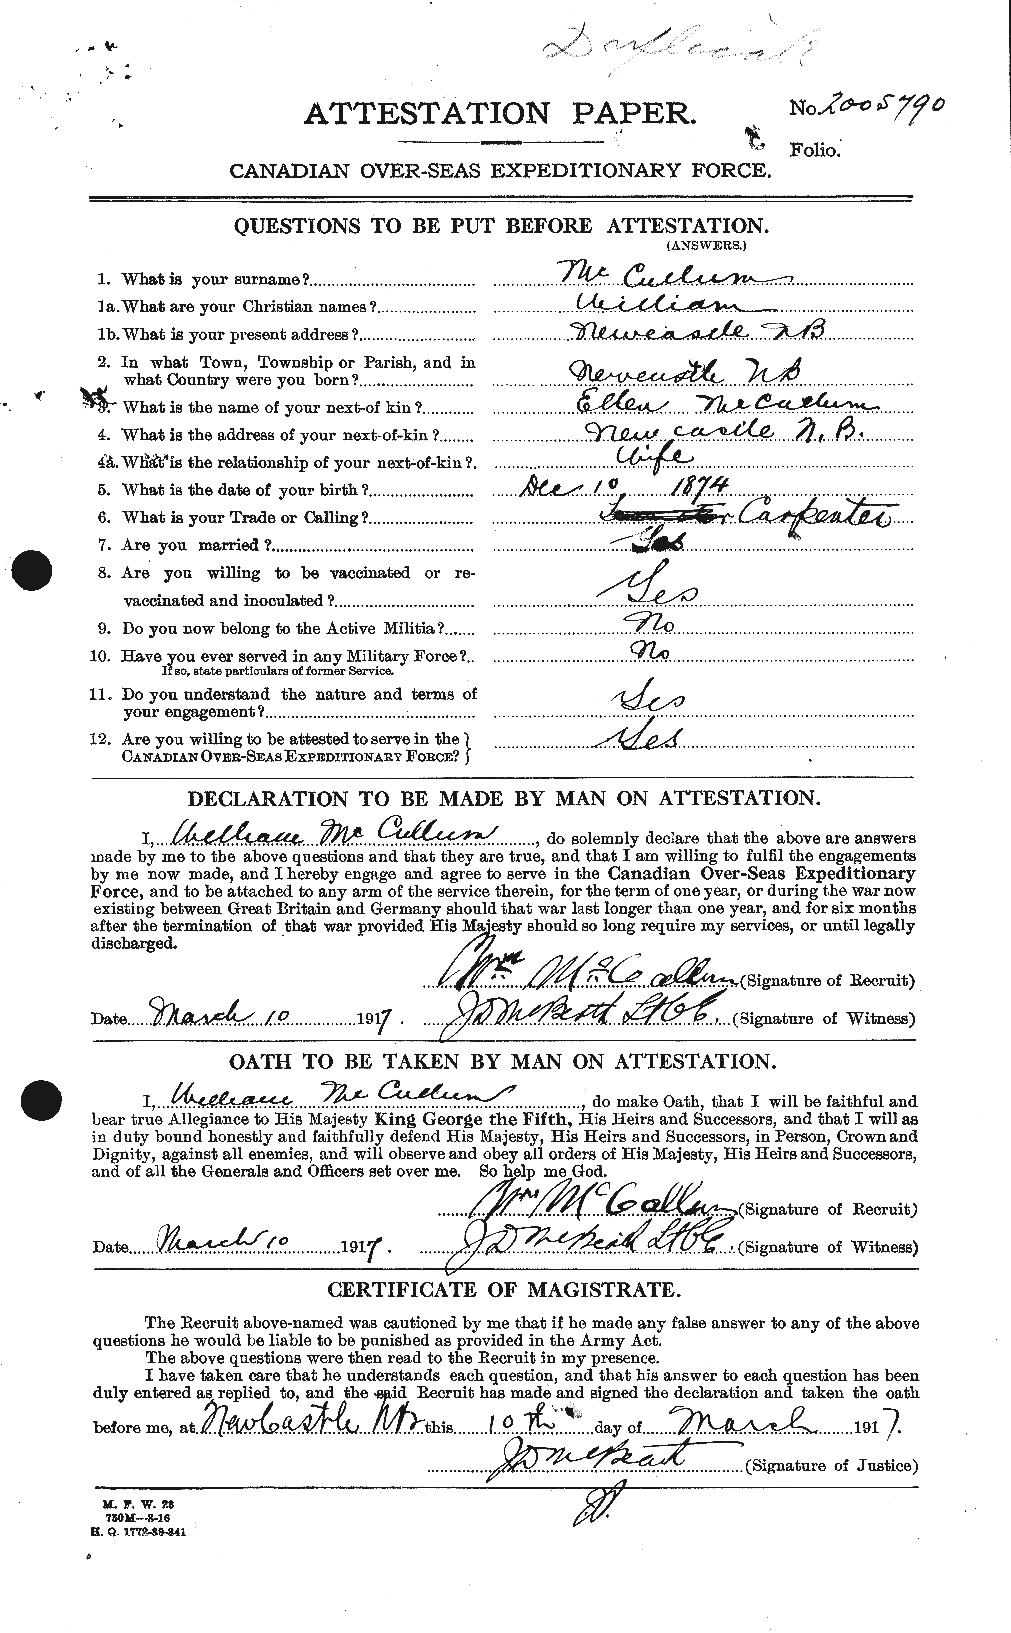 Personnel Records of the First World War - CEF 131433a